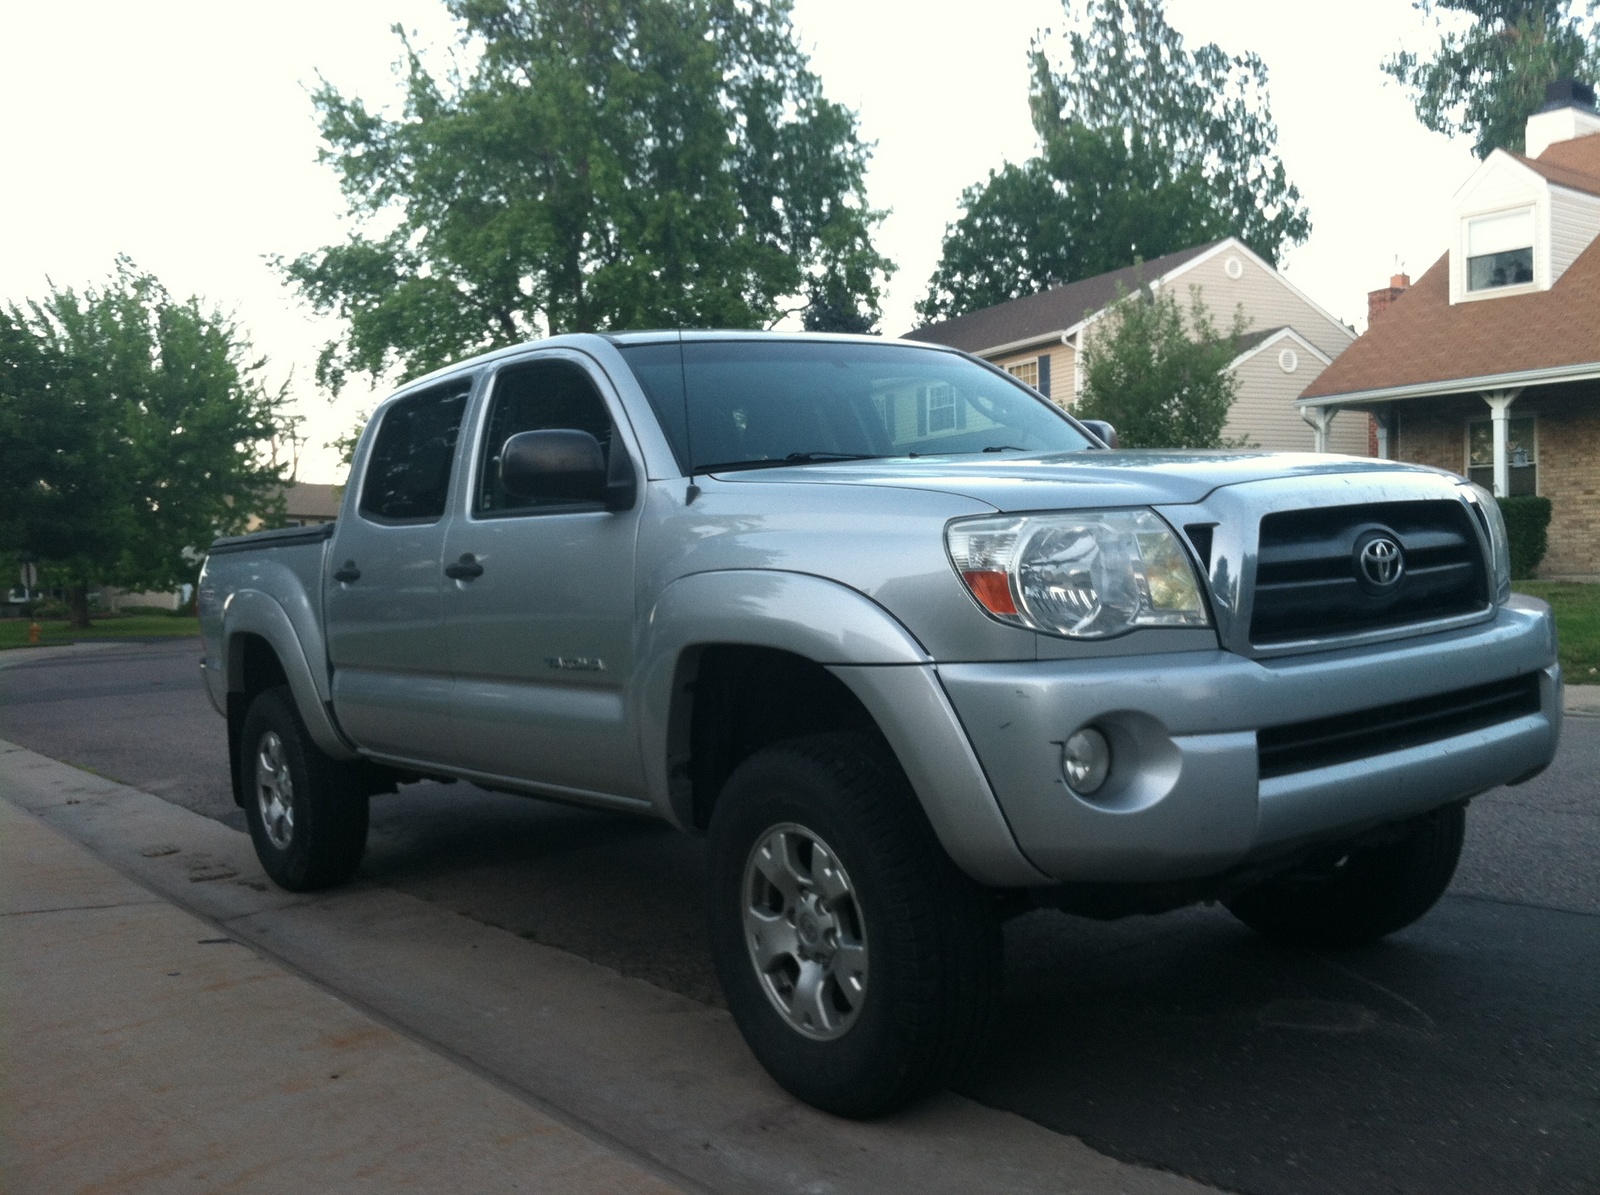 2007 toyota tacoma prerunner double cab review #4